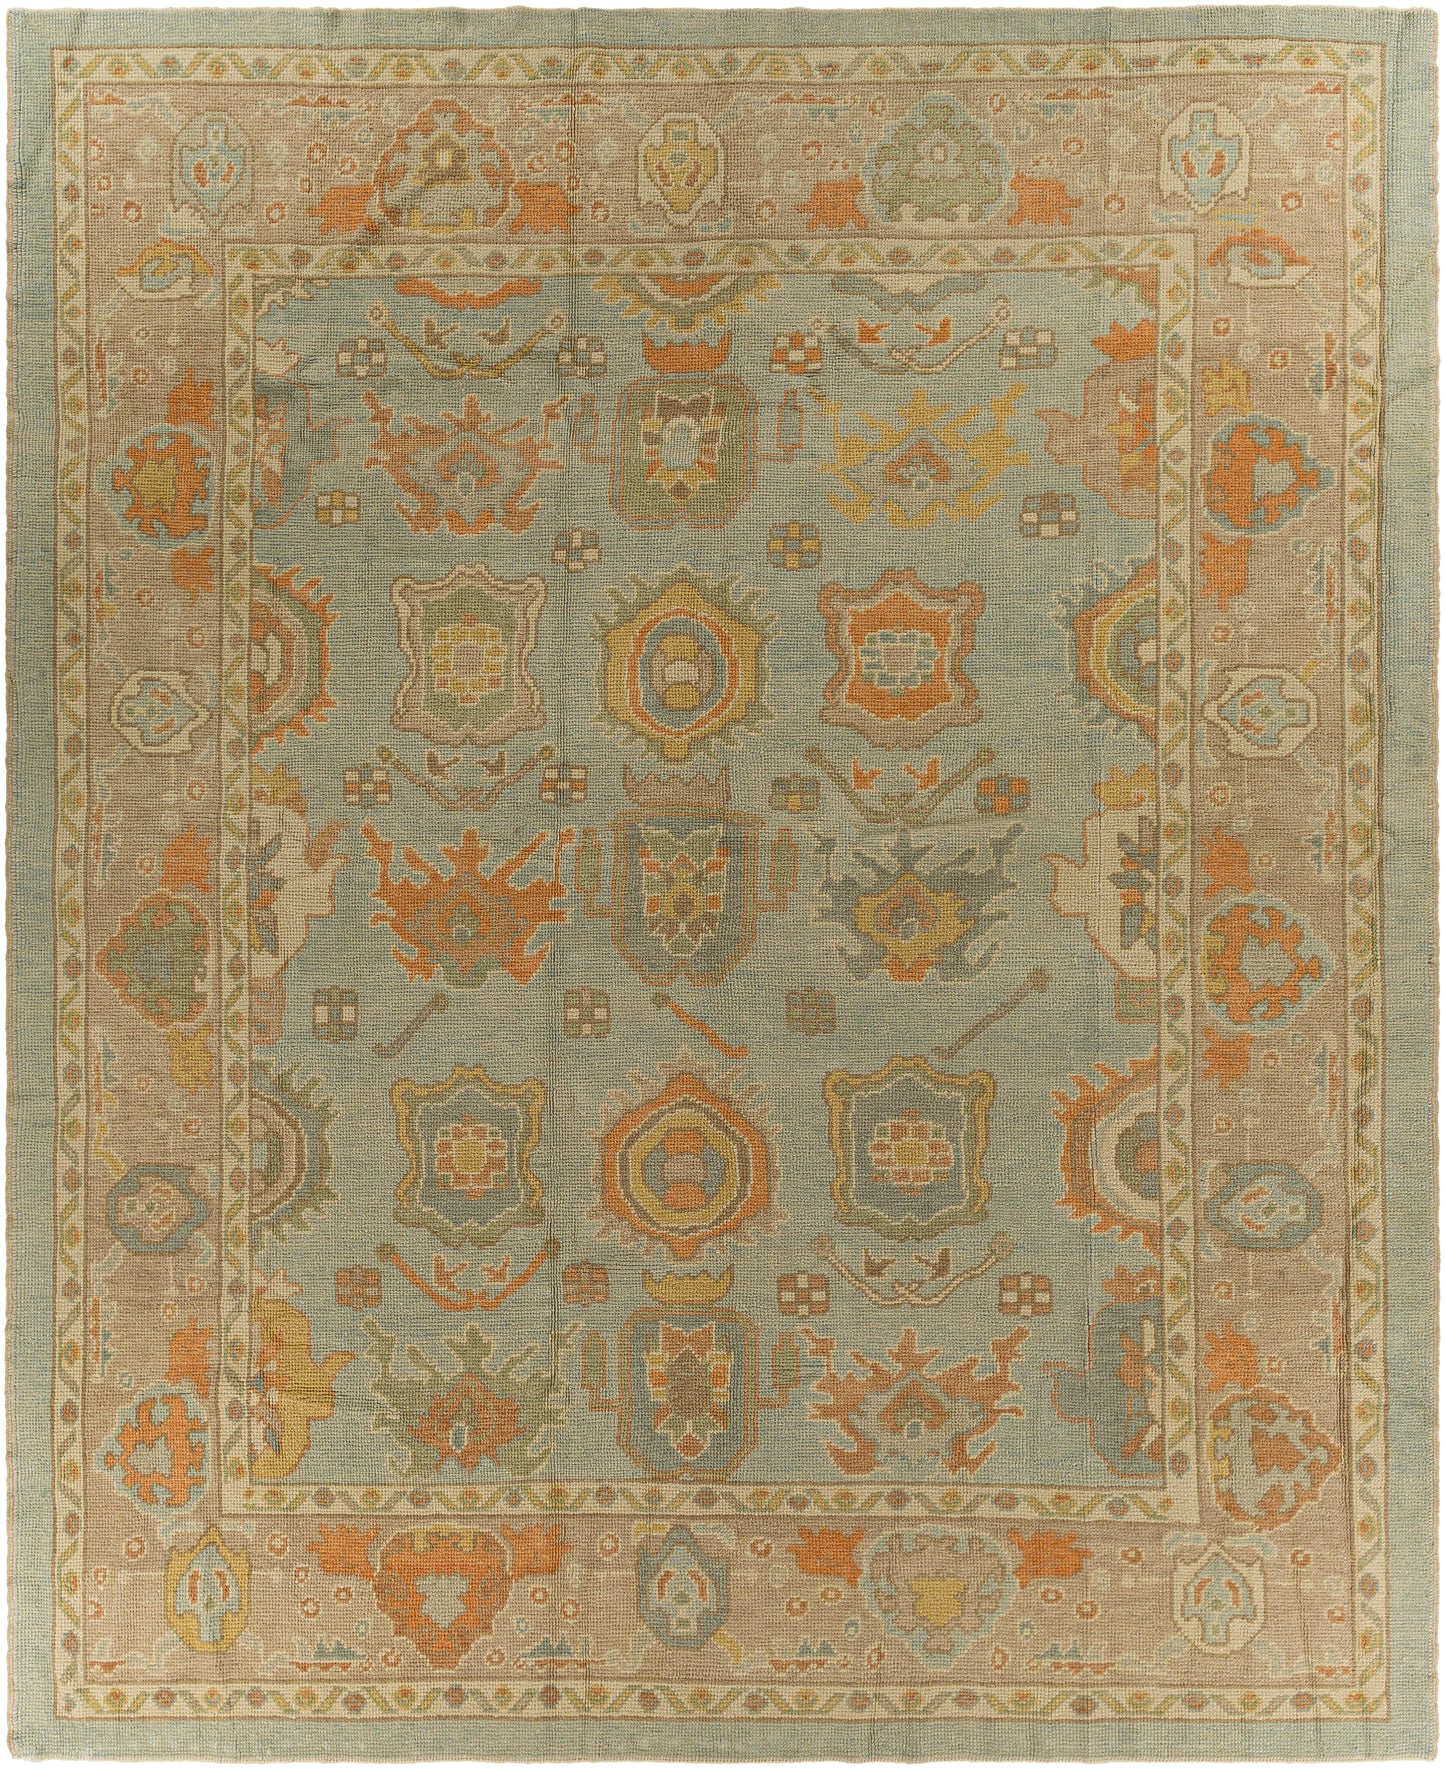 Antique One of a Kind 29837 Hand Knotted Wool Indoor Area Rug by Surya Rugs